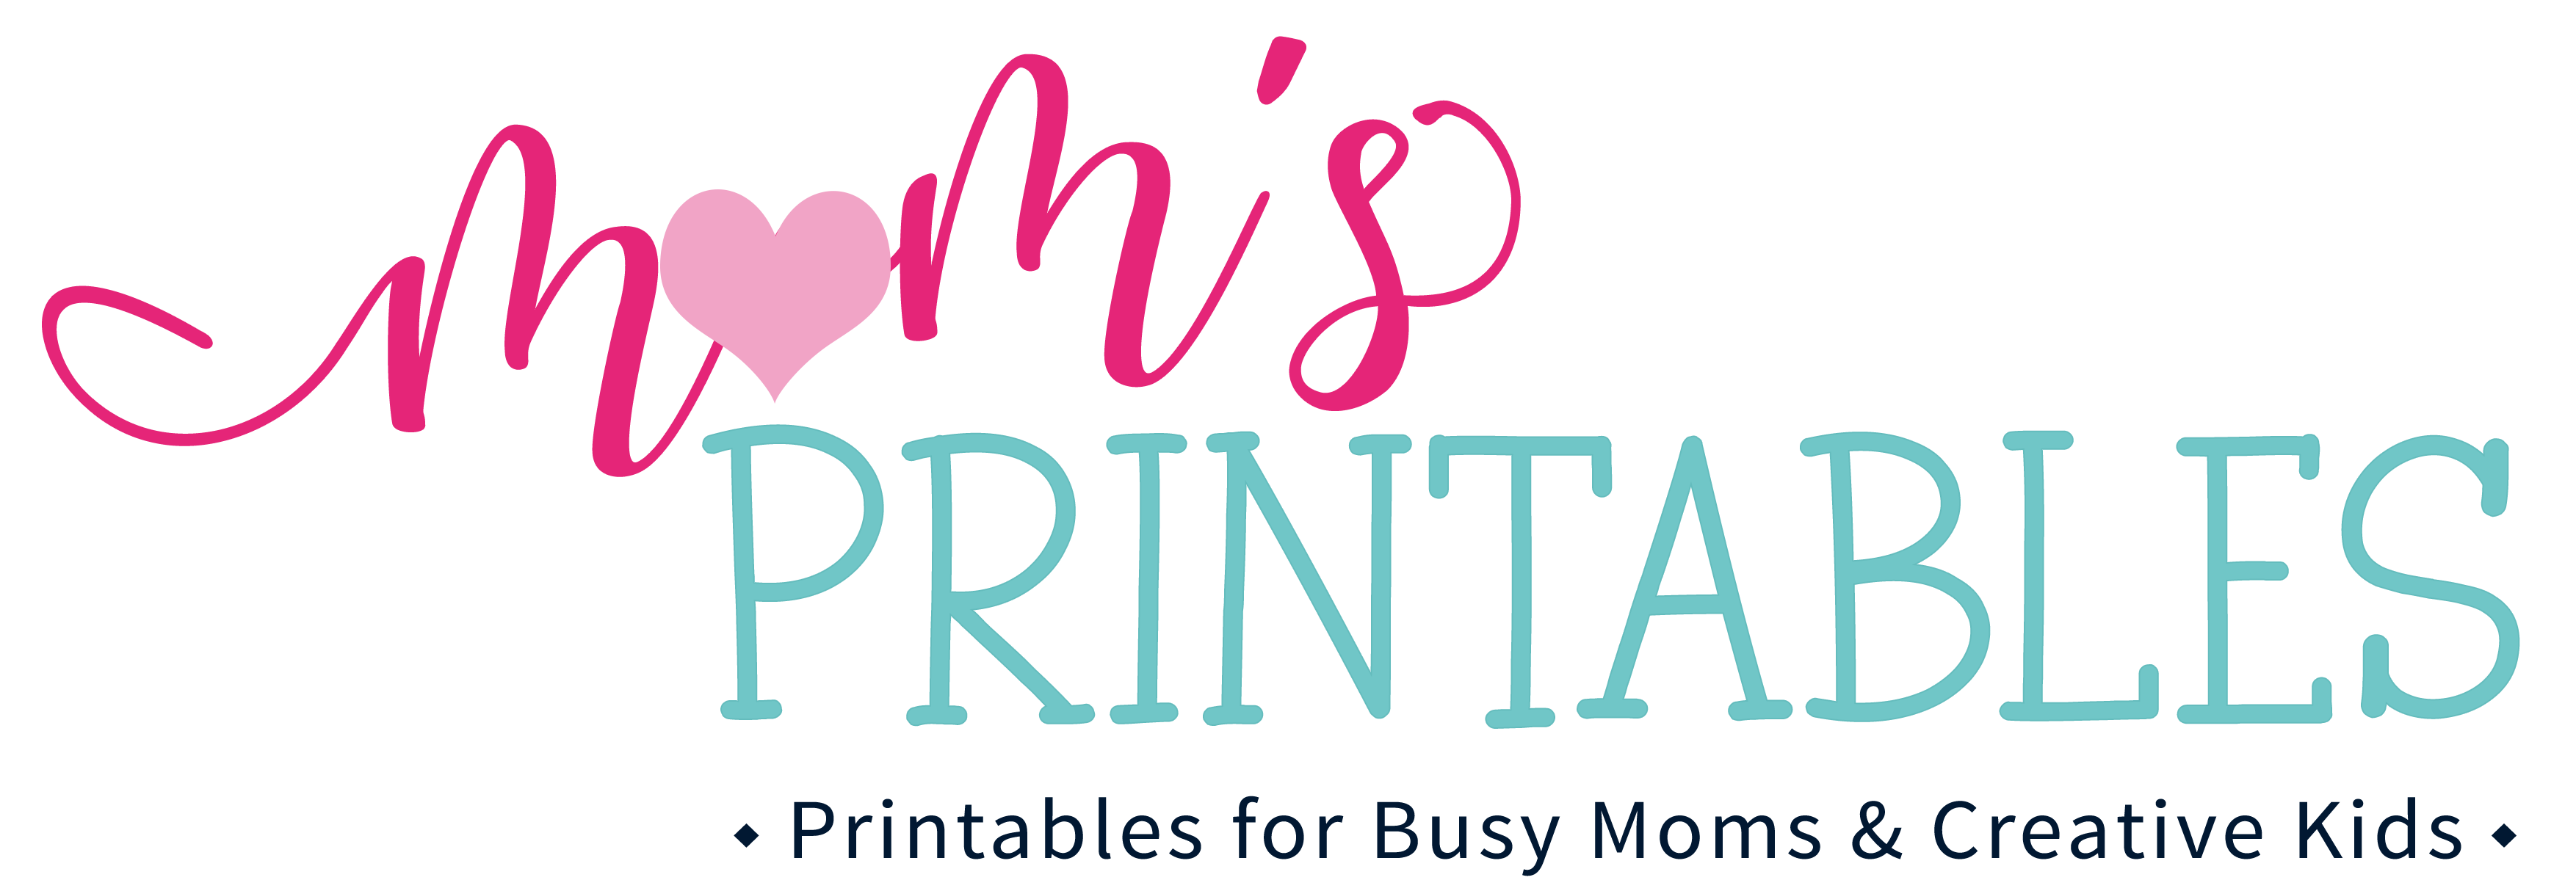 Printable Activities for 2-year-olds - Mom's Printables